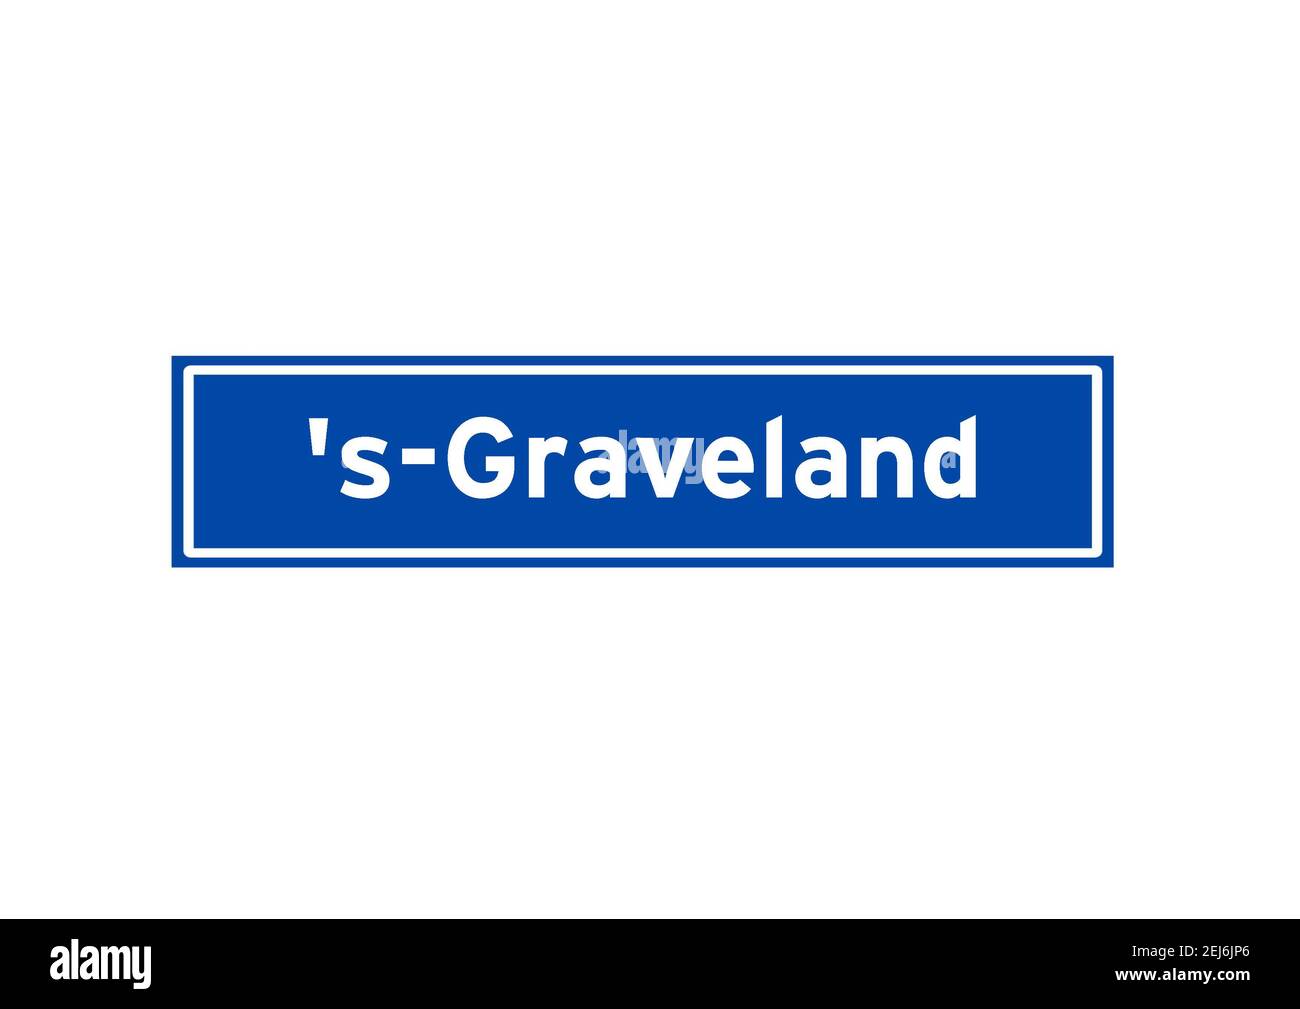 's-Graveland isolated Dutch place name sign. City sign from the Netherlands. Stock Photo